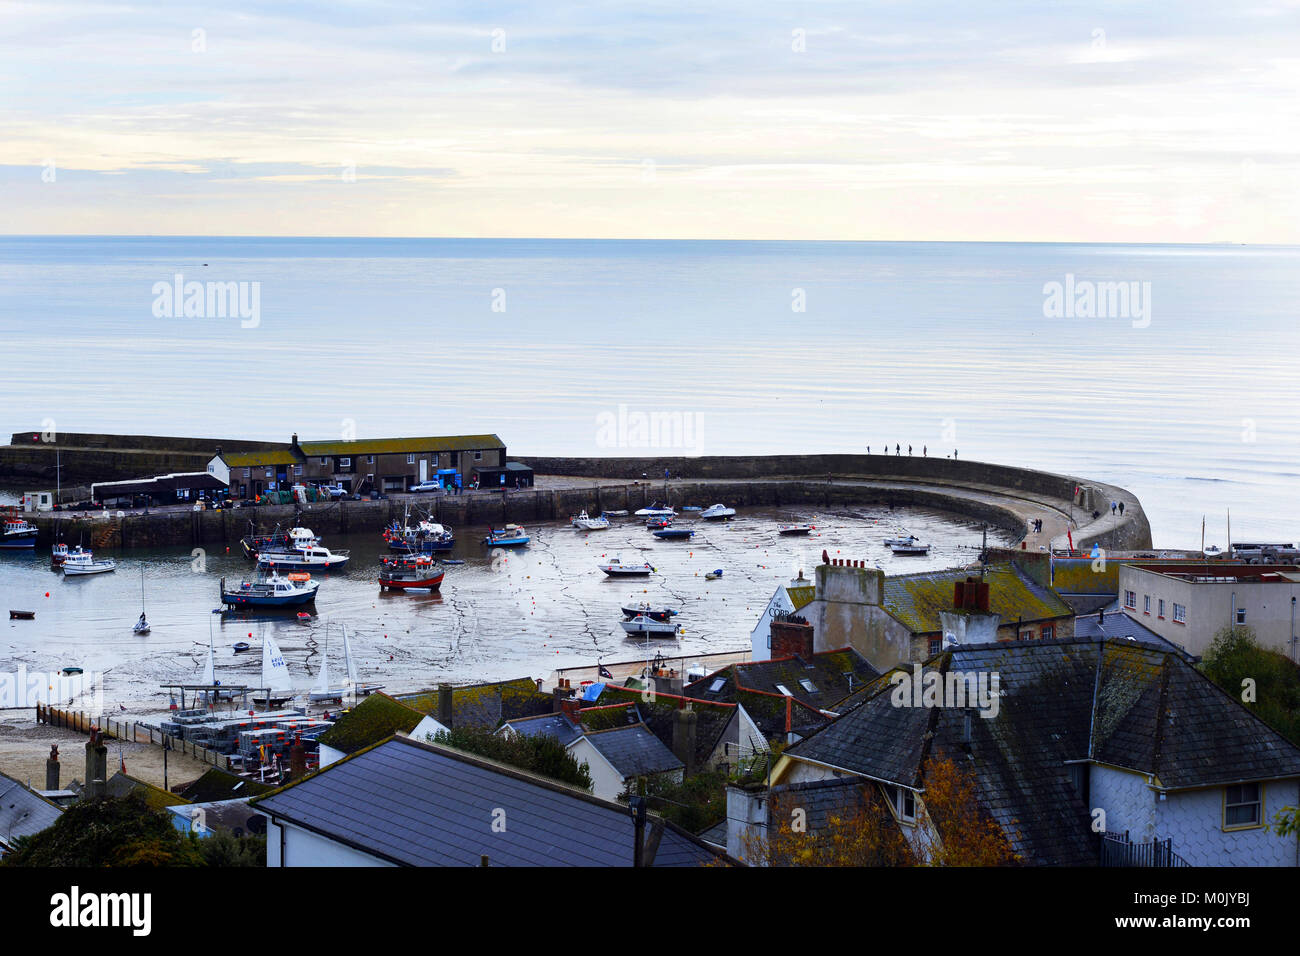 Lyme Regis Bay with a view of the Cob and small boats in the harbour. Stock Photo